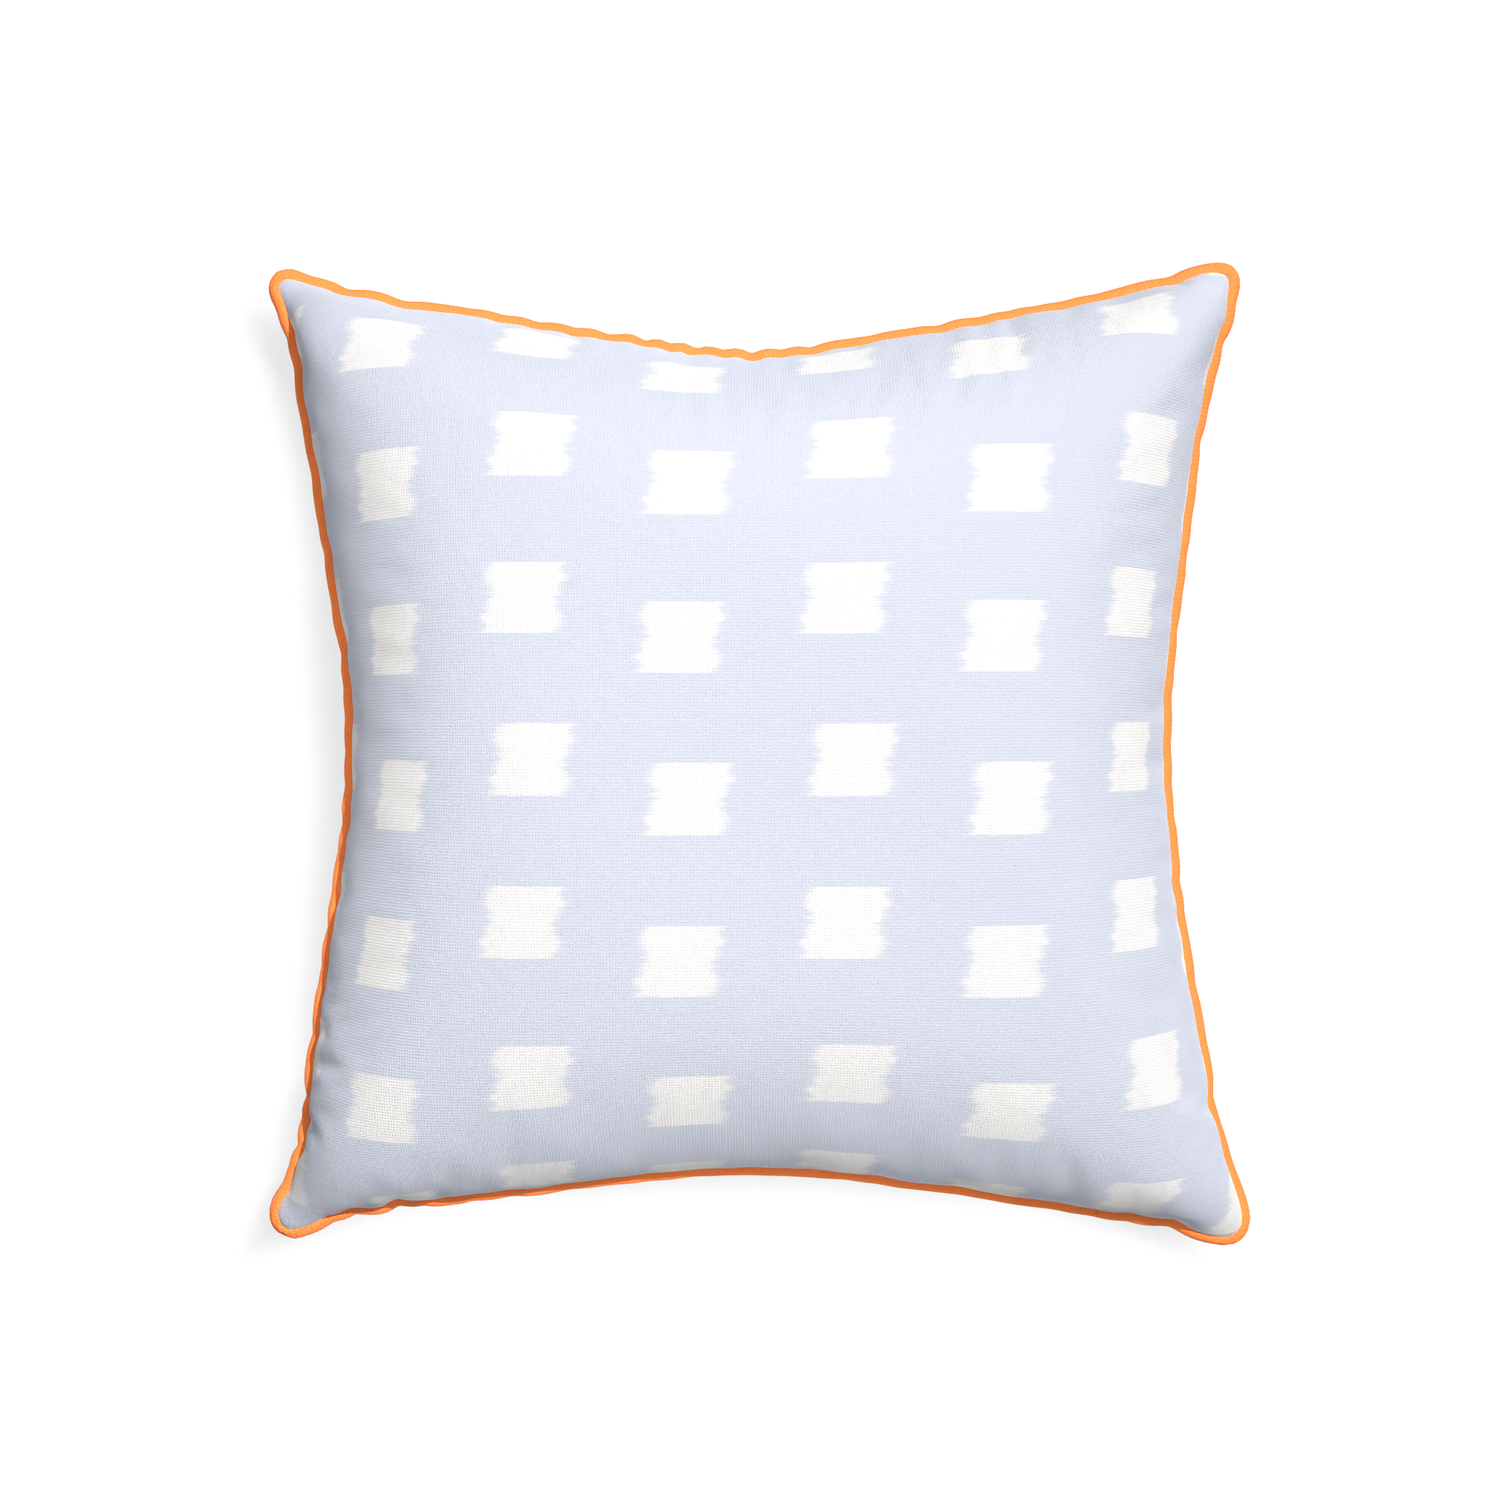 22-square denton custom pillow with clementine piping on white background